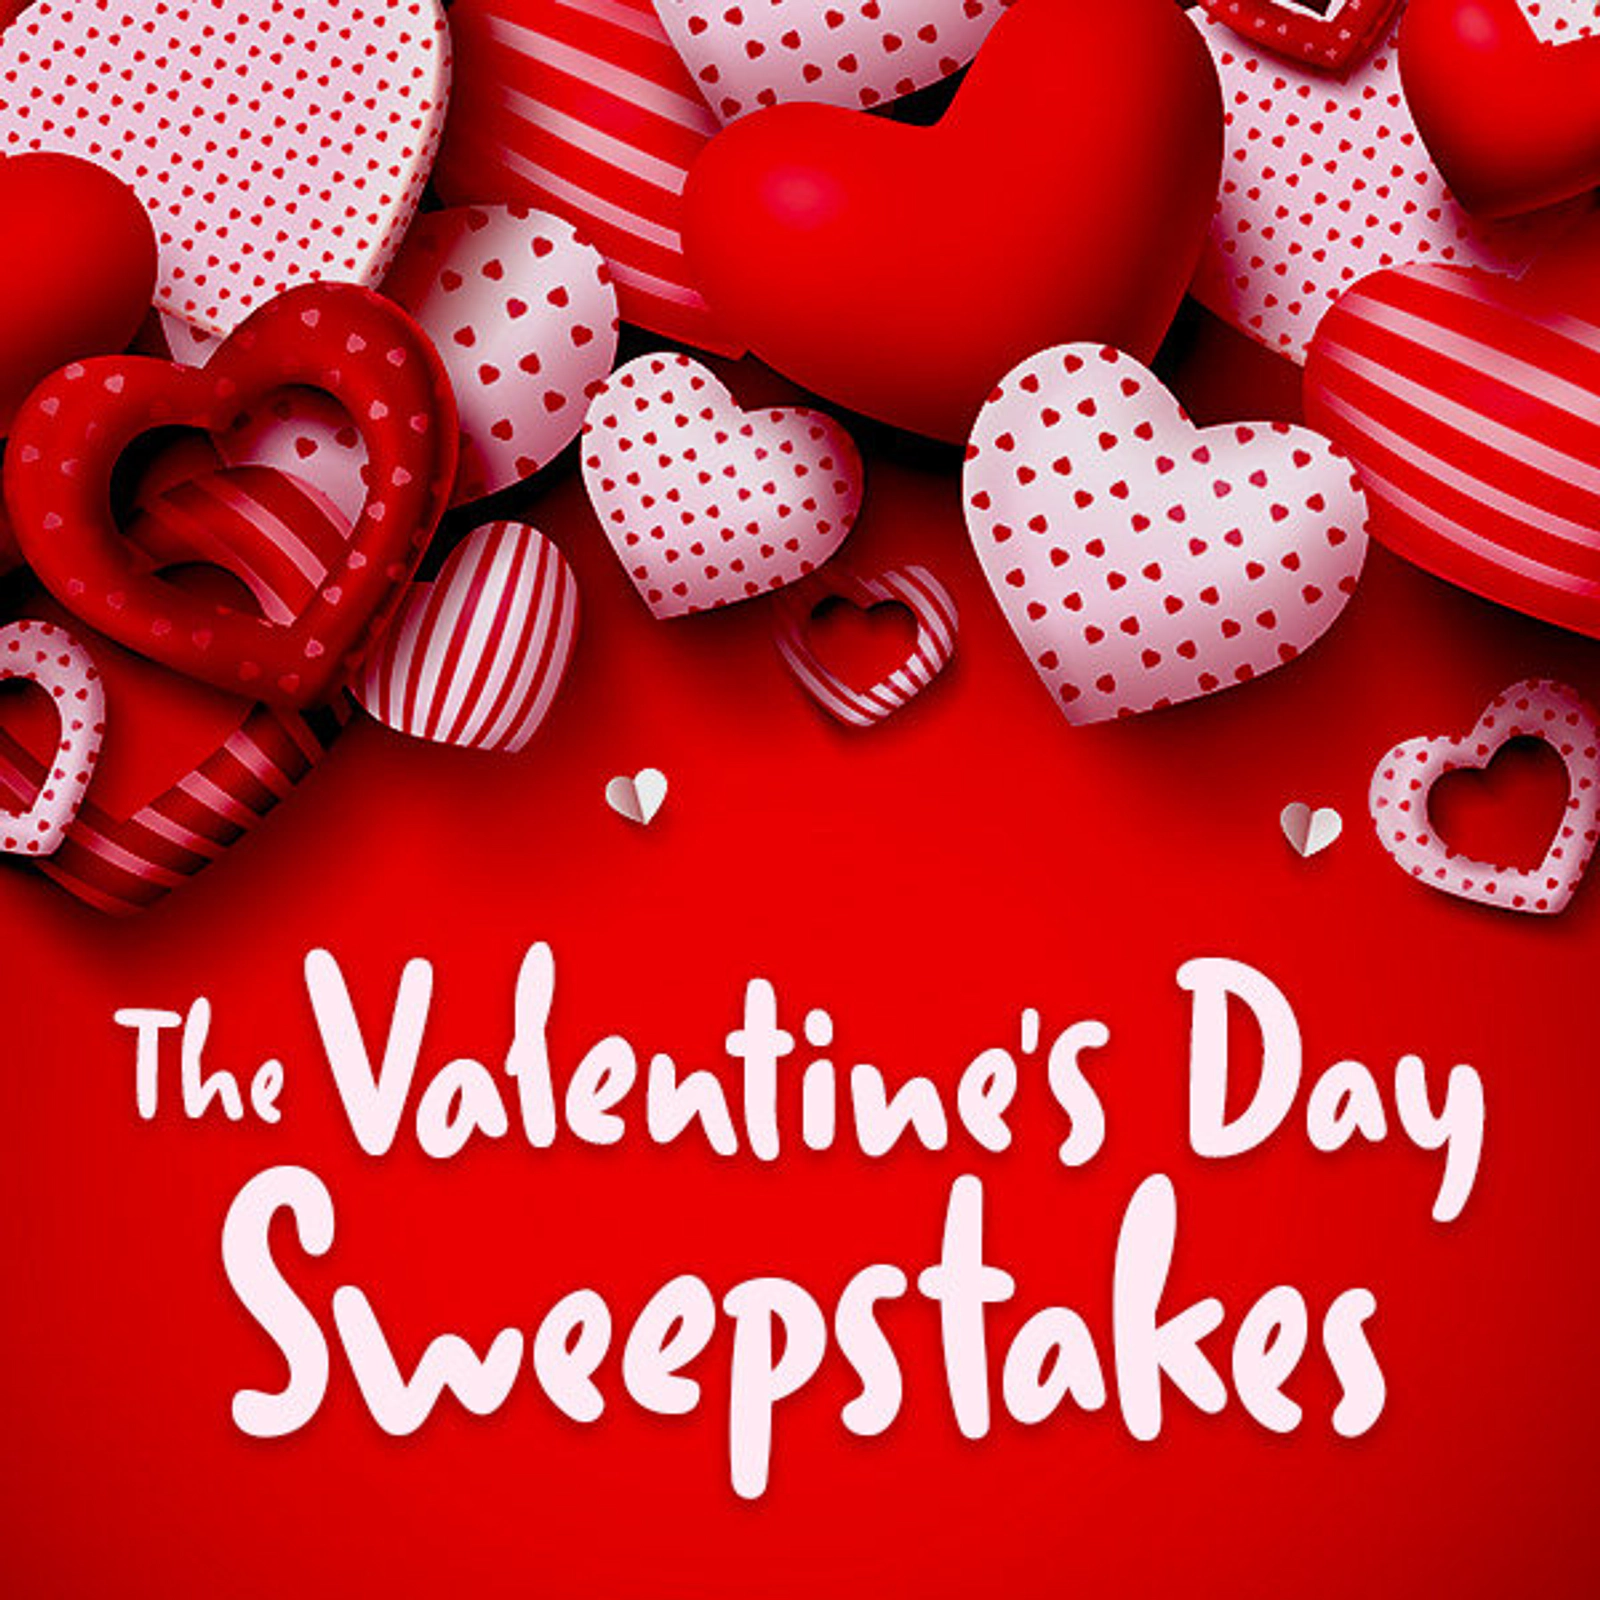 The Valentines Day Sweepstakes